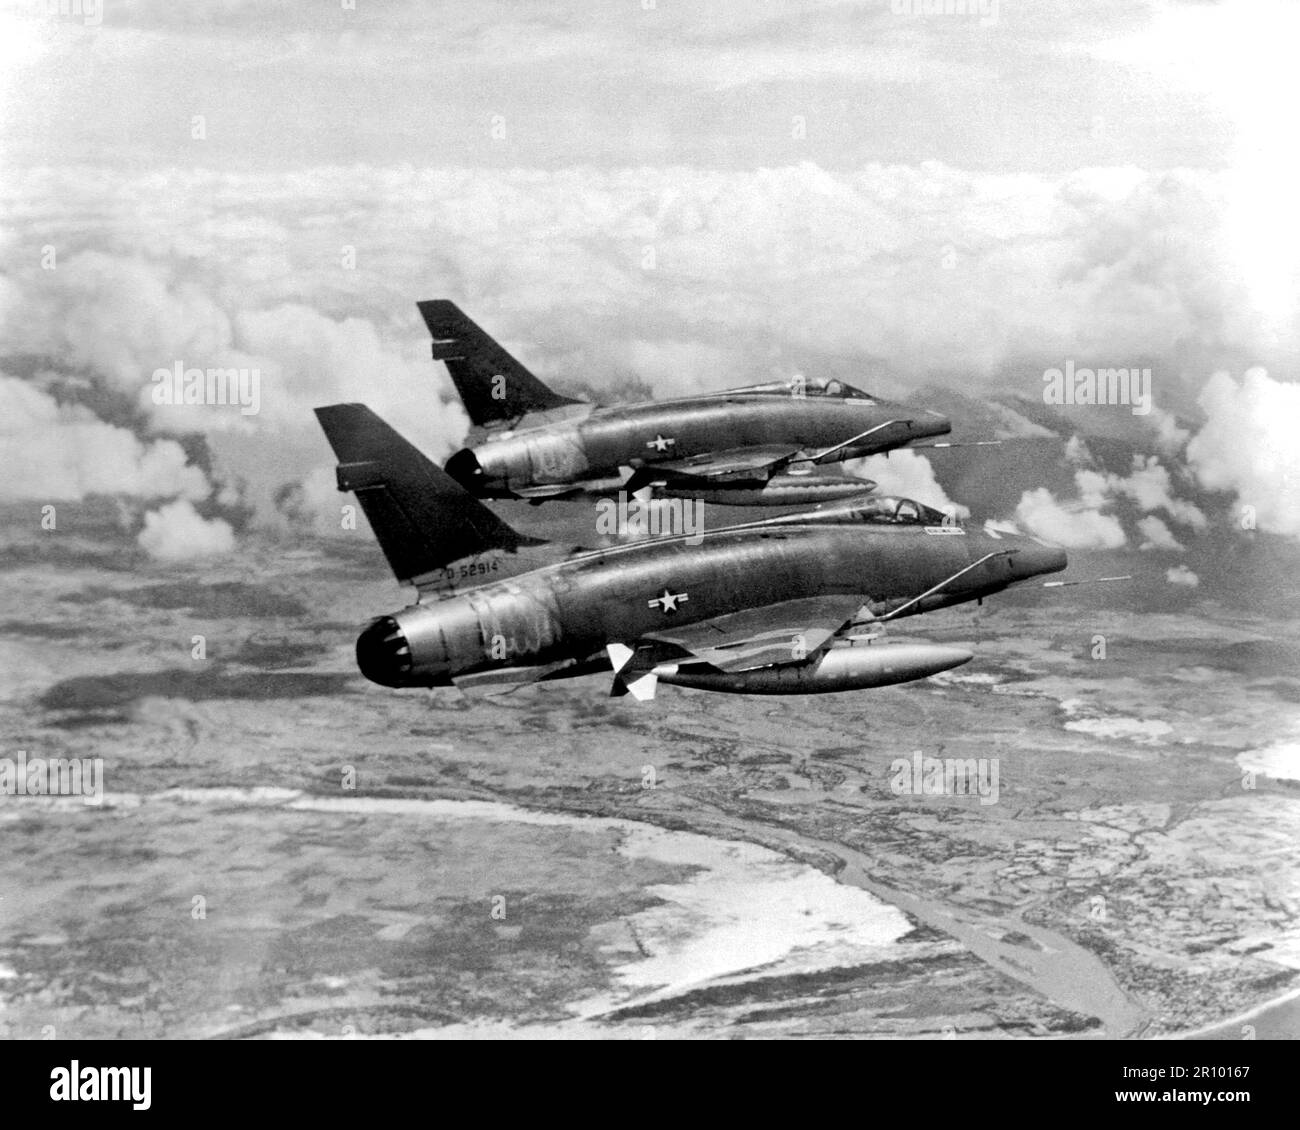 An air-to-air right rear view of two F-100D Super Sabre aircraft streaking over South Vietnam on their way to an assigned target.  The aircraft provides much of the tactical air support to Allied ground forces fighting in Vietnam. Stock Photo